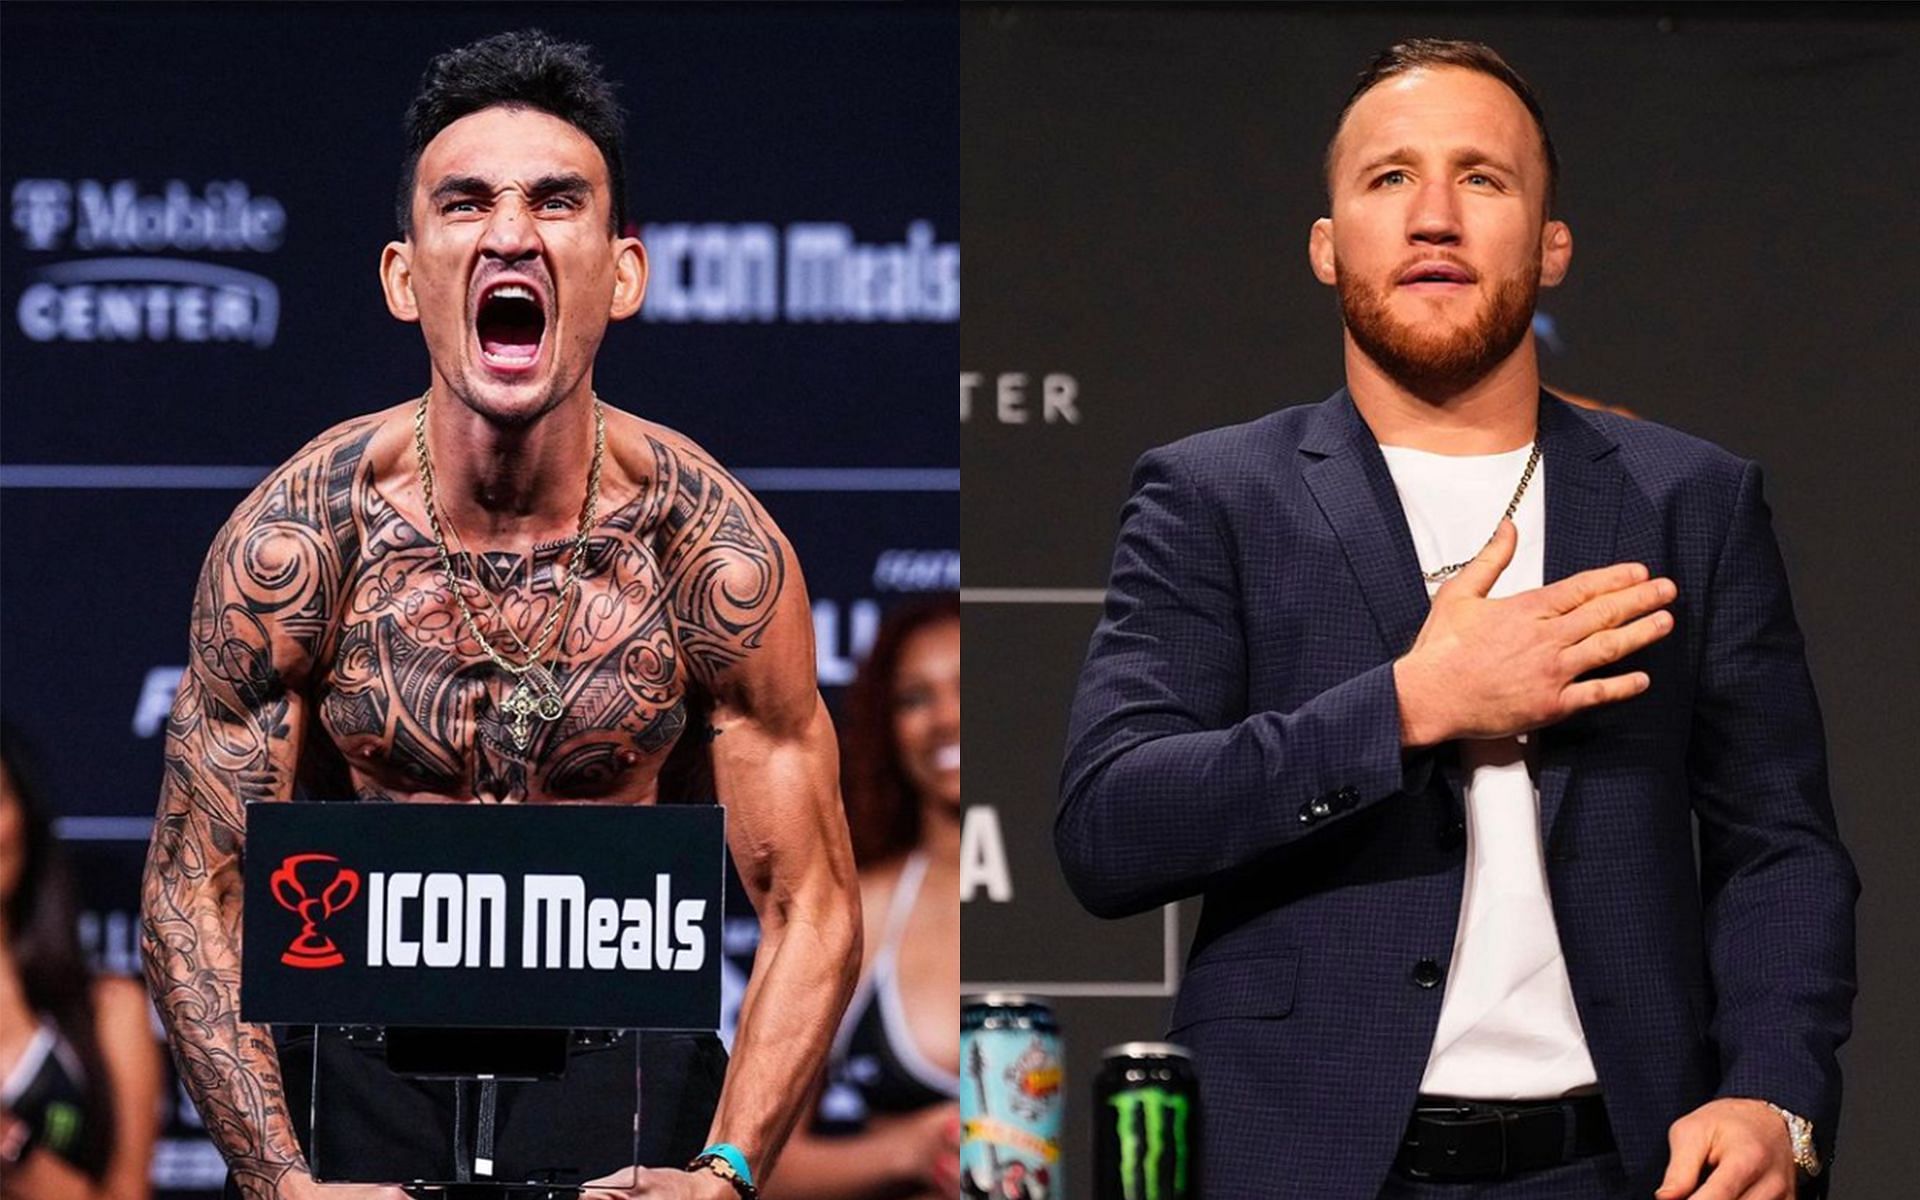 Max Holloway (left) will challenge Justin Gaethje (right) for the ceremonial BMF title at UFC 300 [Images Courtesy: @blessedmma and @justin_gaethje Instagram] 